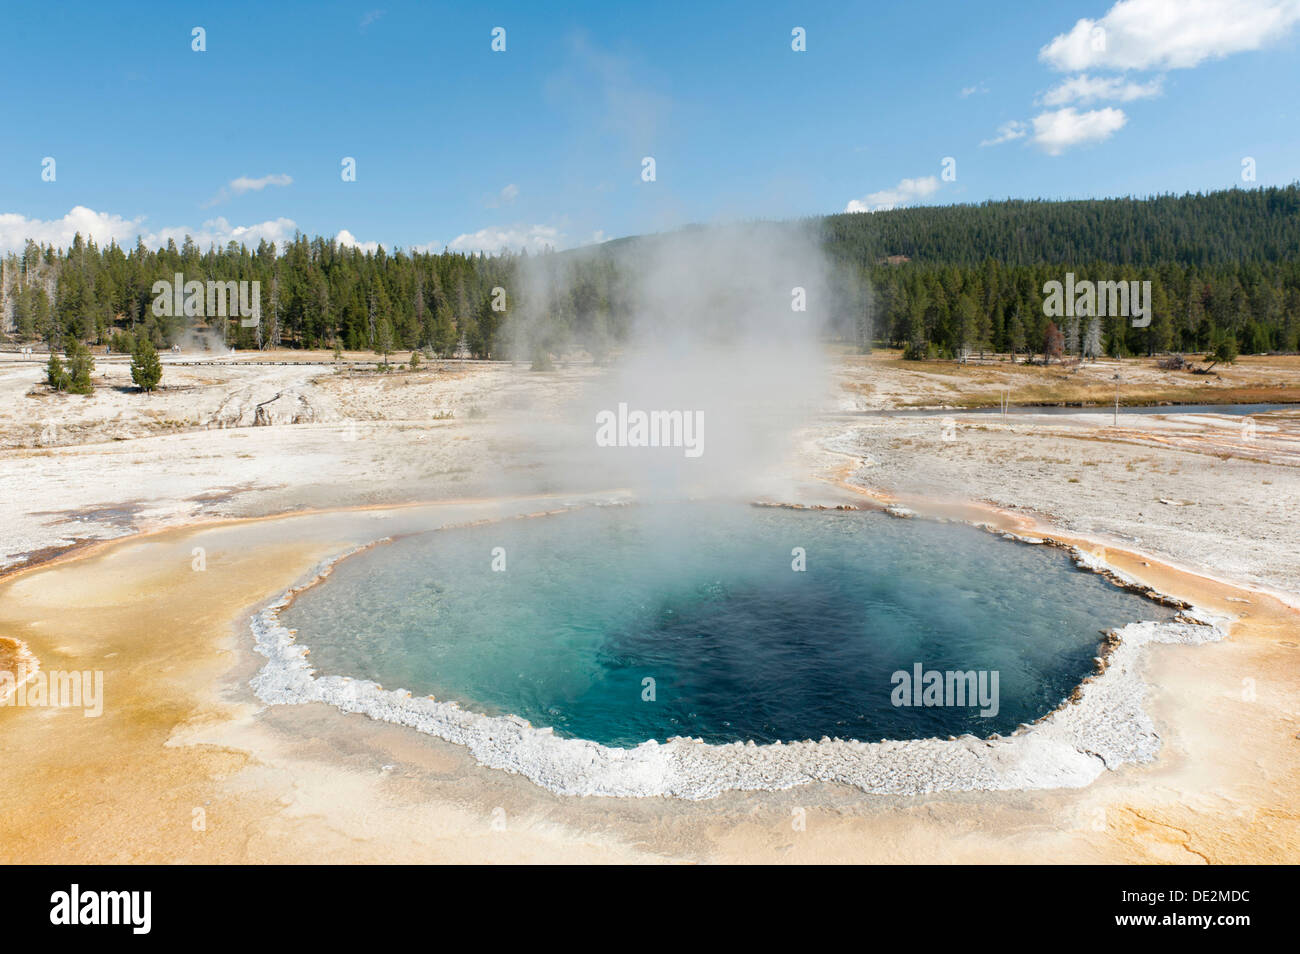 Hot spring, boiling water, steam, Crested Pool, Castle-Grand Area, Upper Geyser Basin, Yellowstone National Park, Wyoming Stock Photo